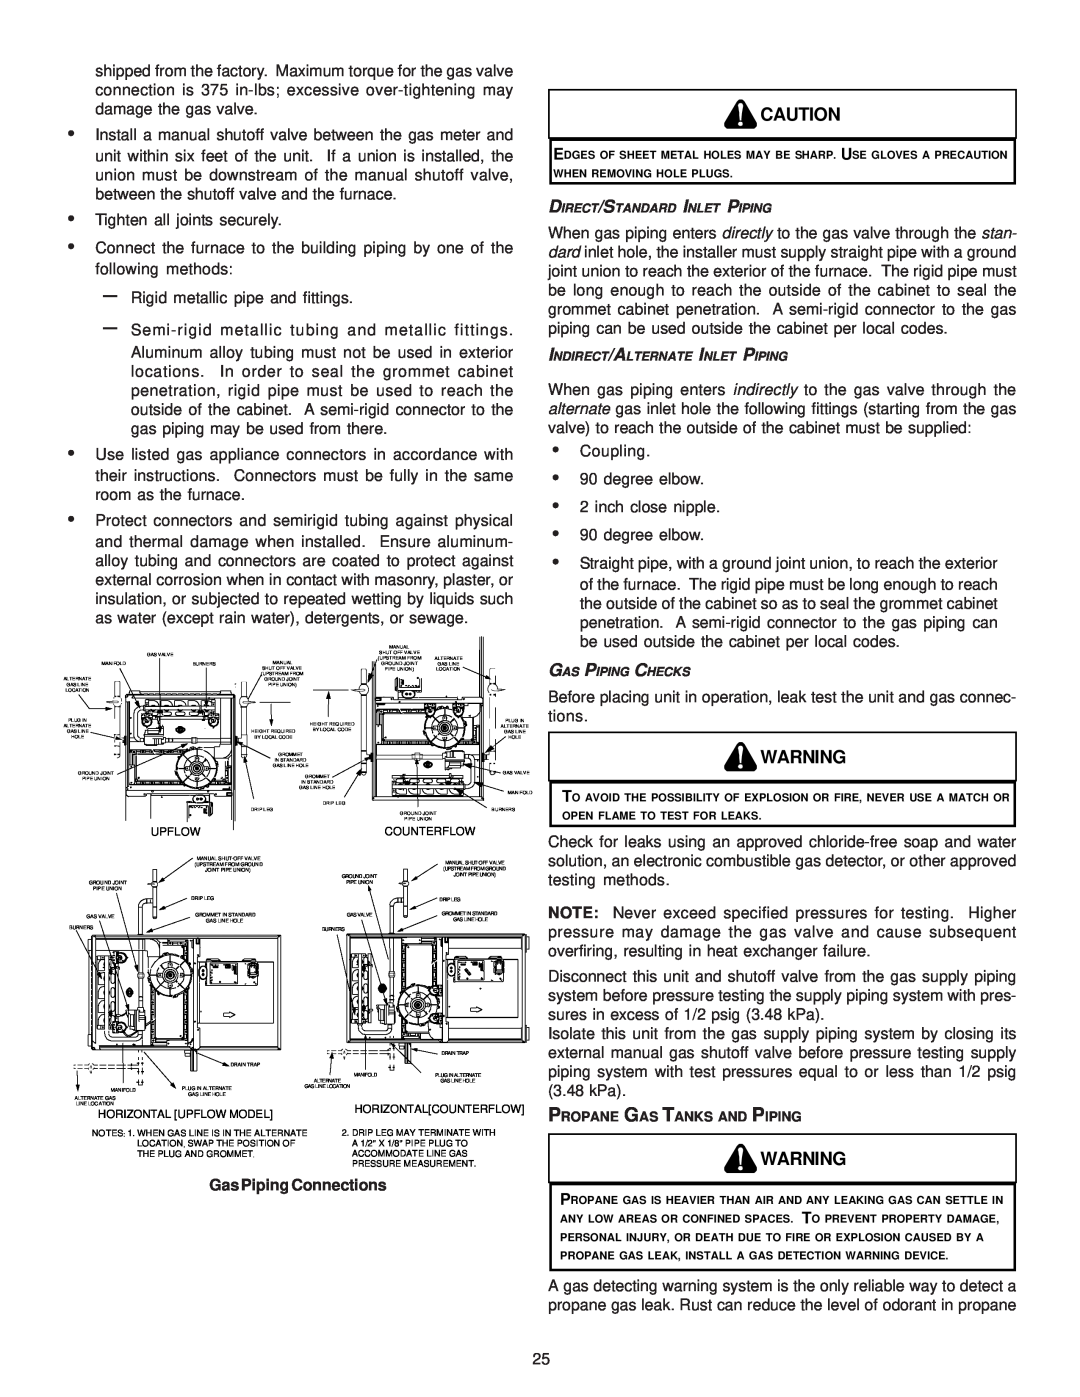 Amana ACV9, AMV9 installation instructions Gas Piping Connections 